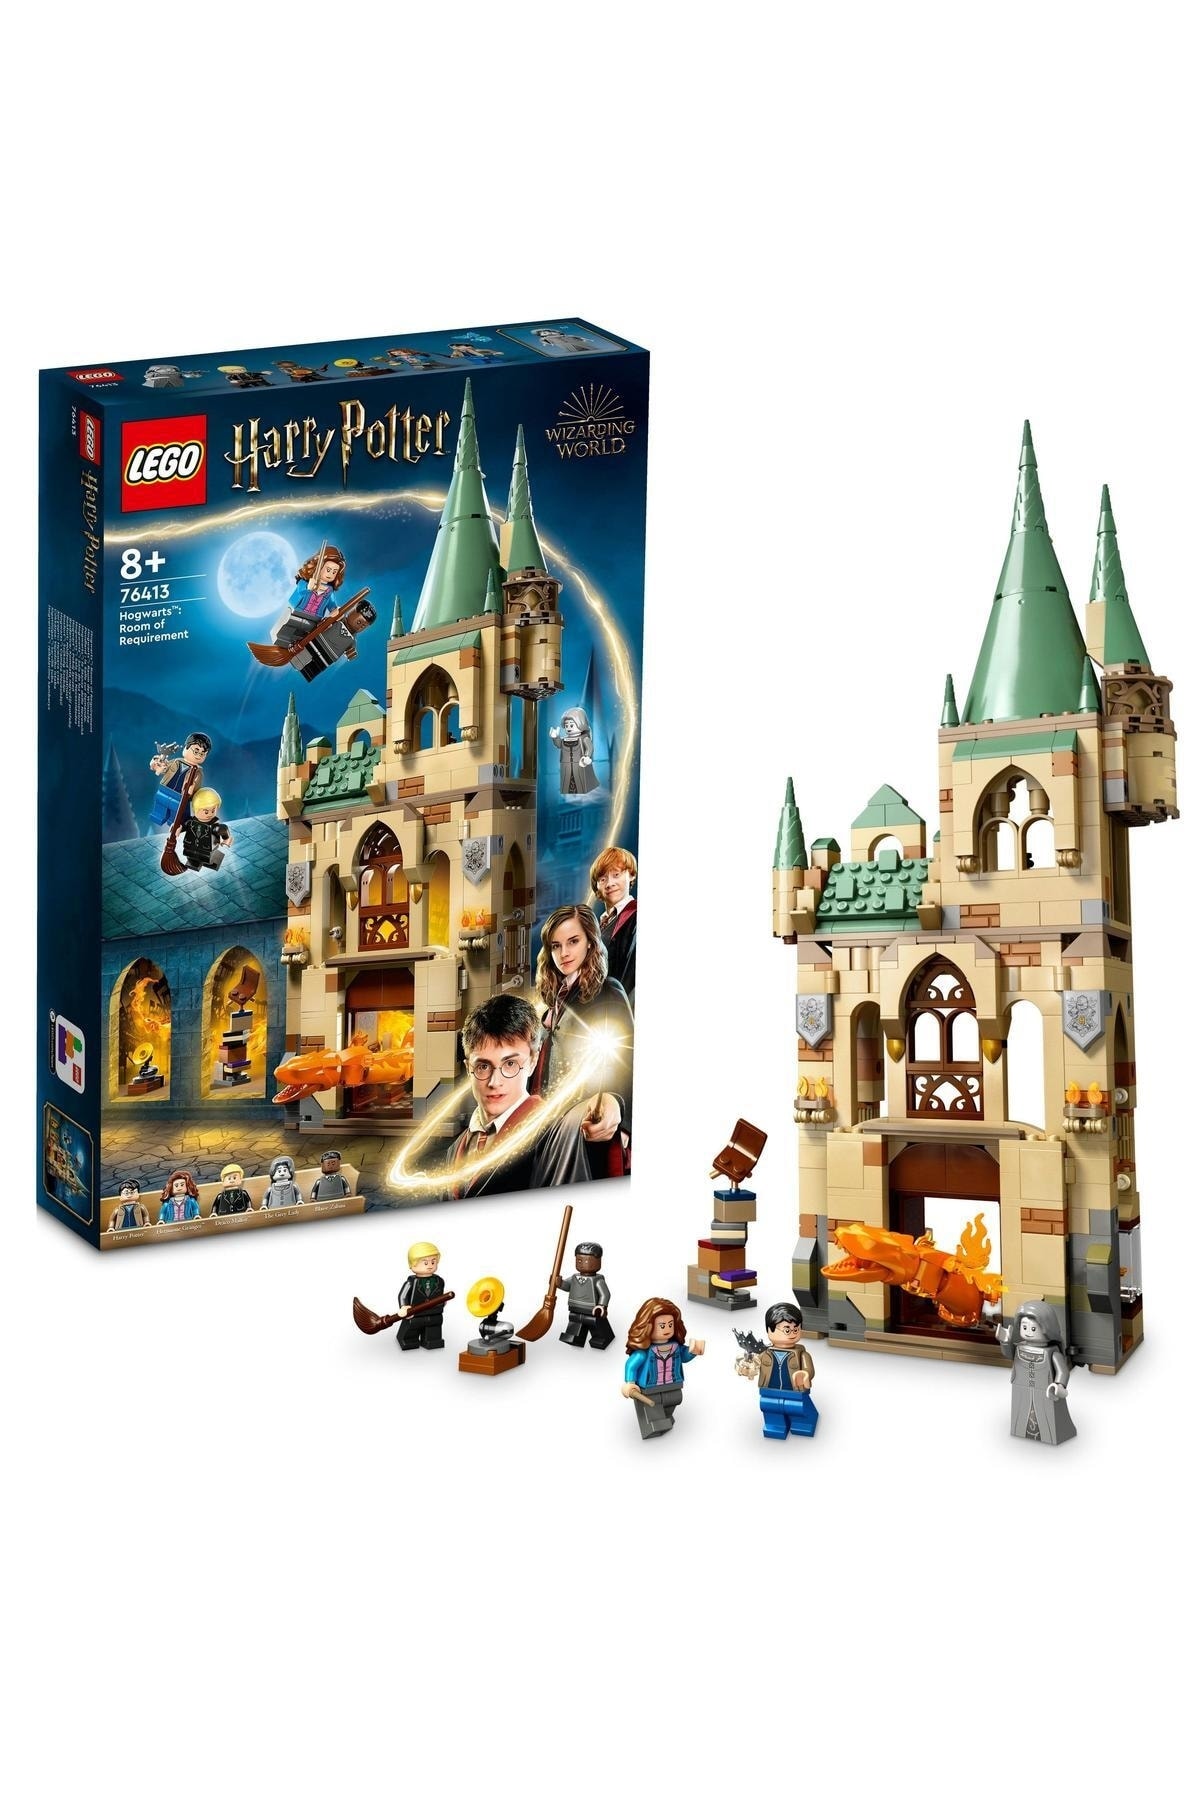 LEGO ® Harry Potter™ Hogwarts™: Room of Requireمردانهt 76413 - Creative Toy Building Set (587 Pieces)